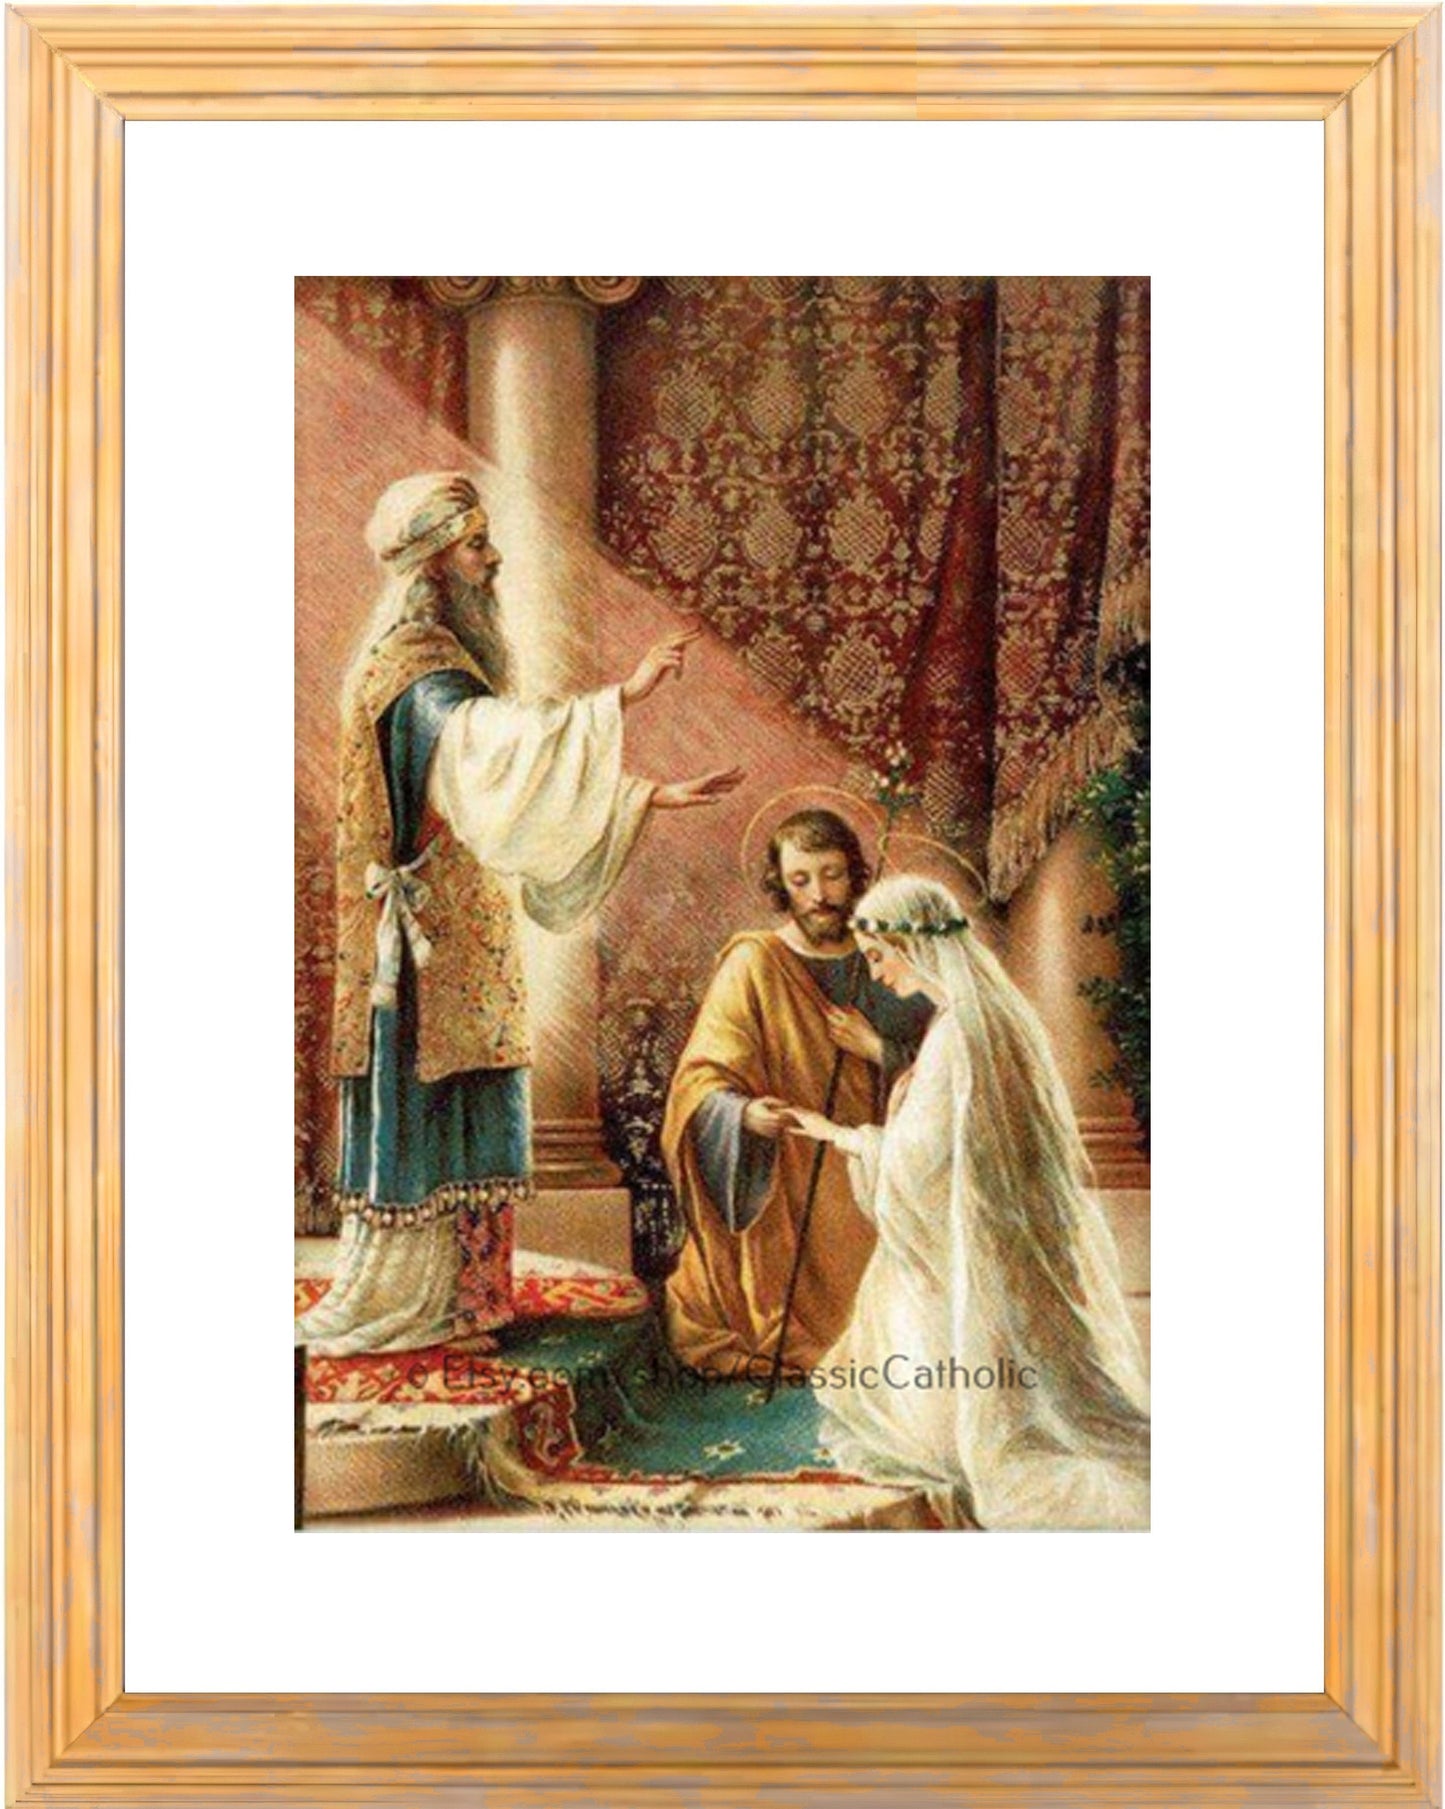 Wedding of Joseph and Mary – 3 Sizes – Wedding Gift/Anniversary Gift – based on a Vintage Holy Card – Catholic Art Print – Archival Quality